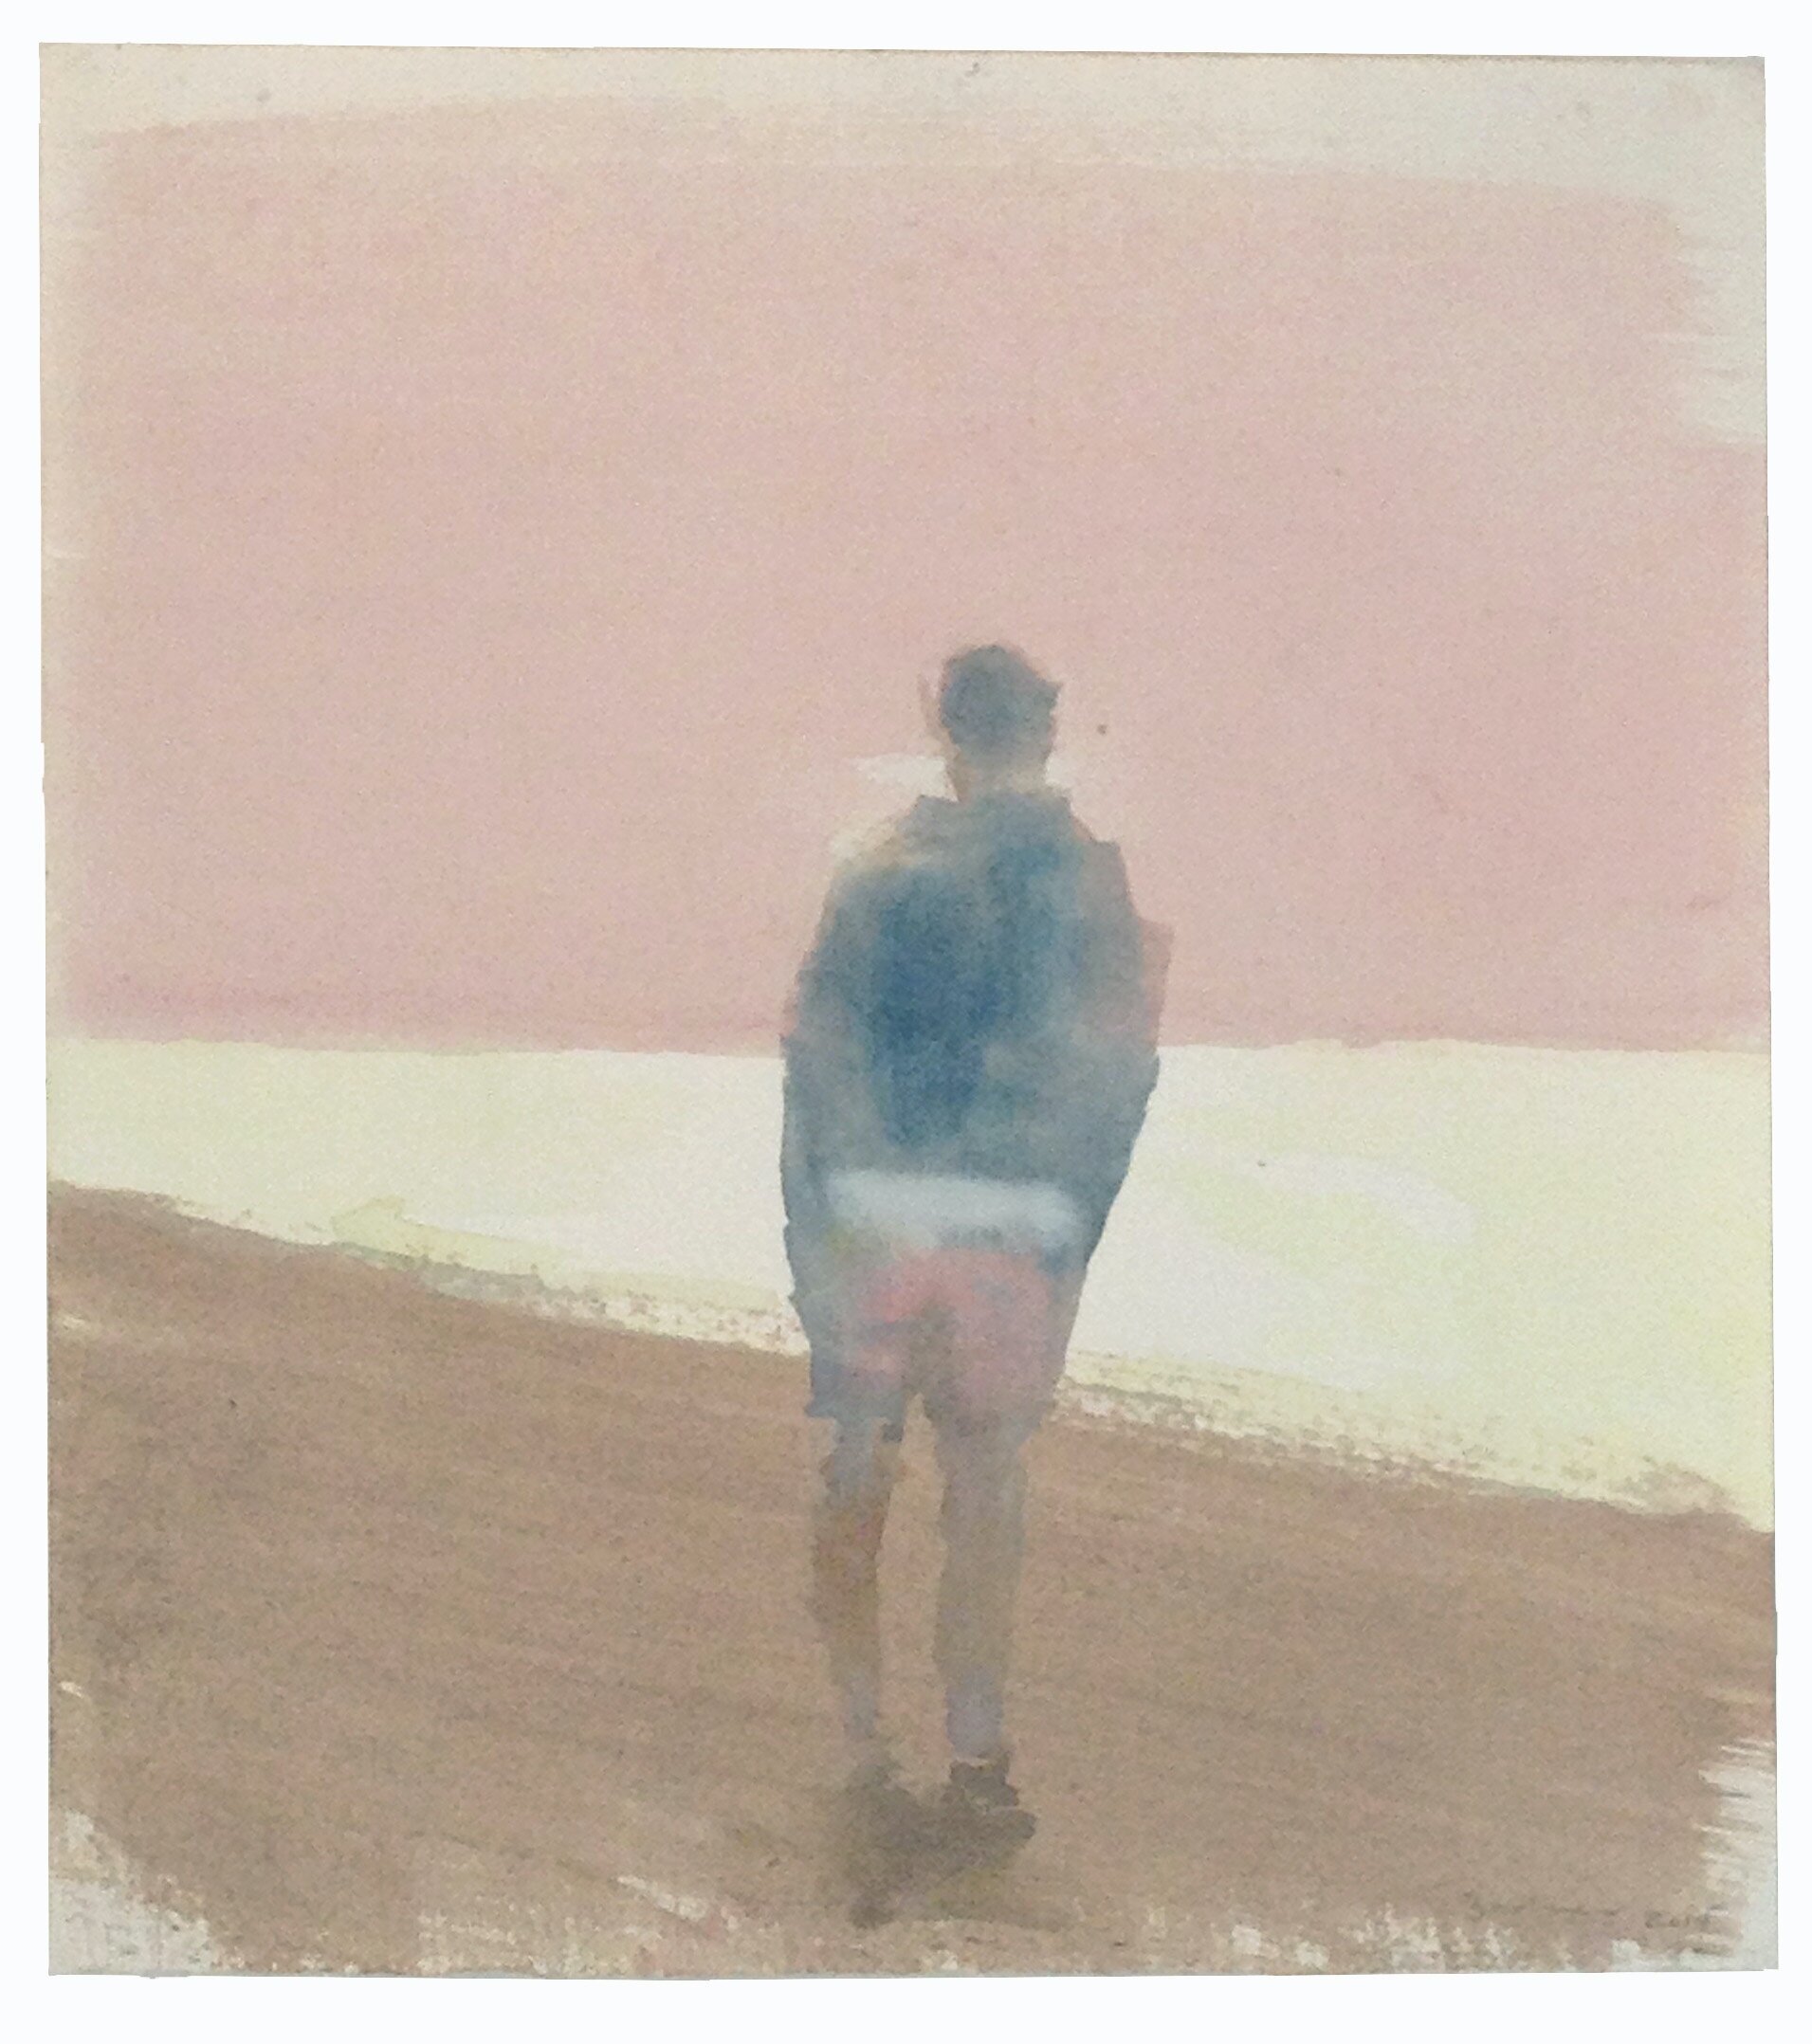  On The Beach 1 13 x 11.5 inches Watercolor on paper 2014 